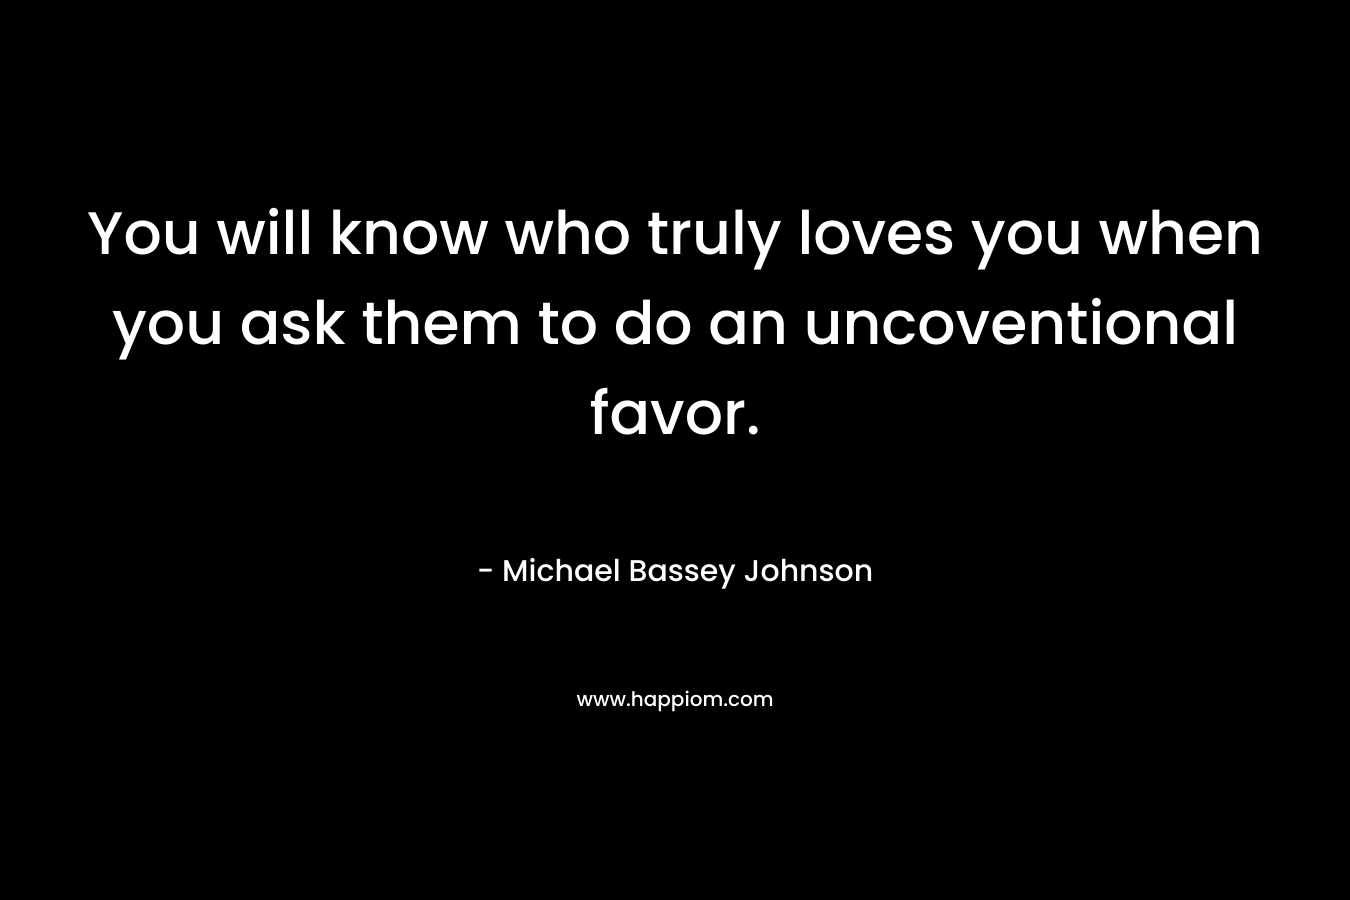 You will know who truly loves you when you ask them to do an uncoventional favor.